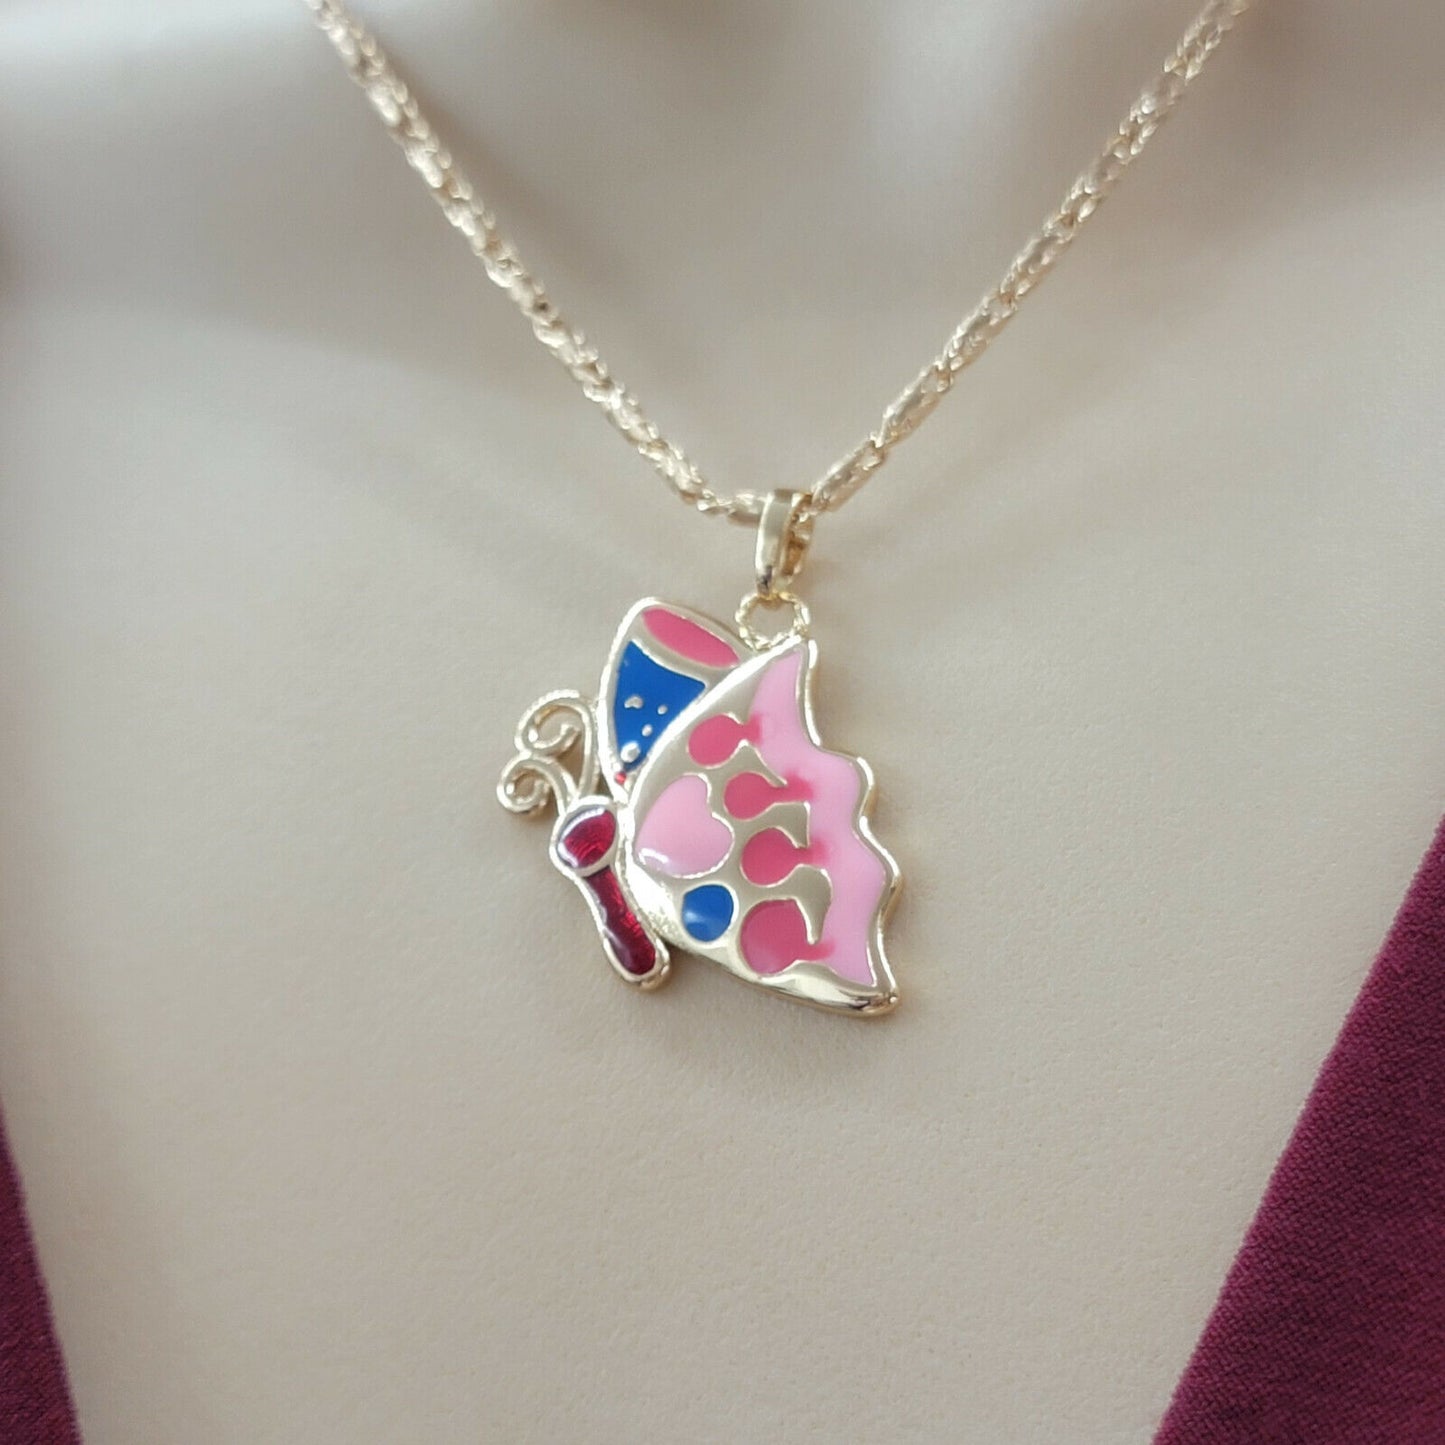 Necklaces - 18K Gold Plated. Multicolor Flying Butterfly Pendant & Chain.